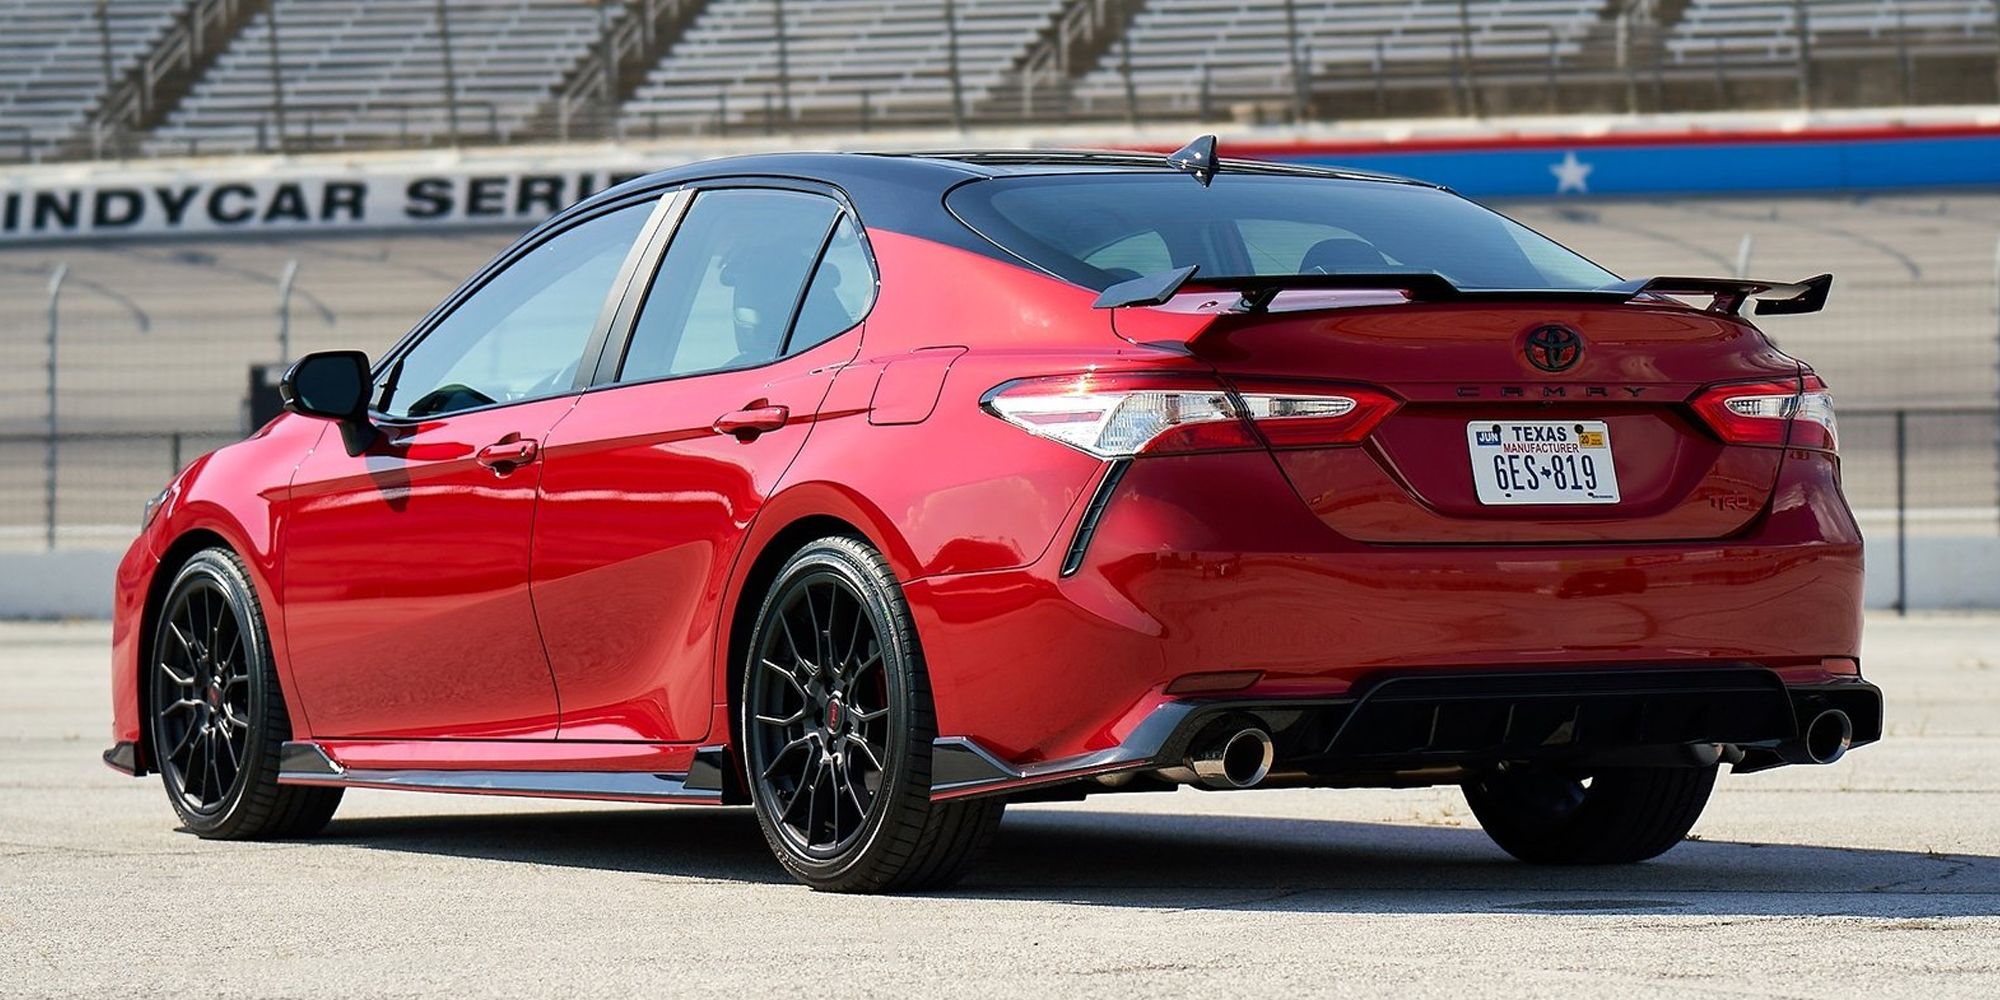 The rear of a Camry TRD